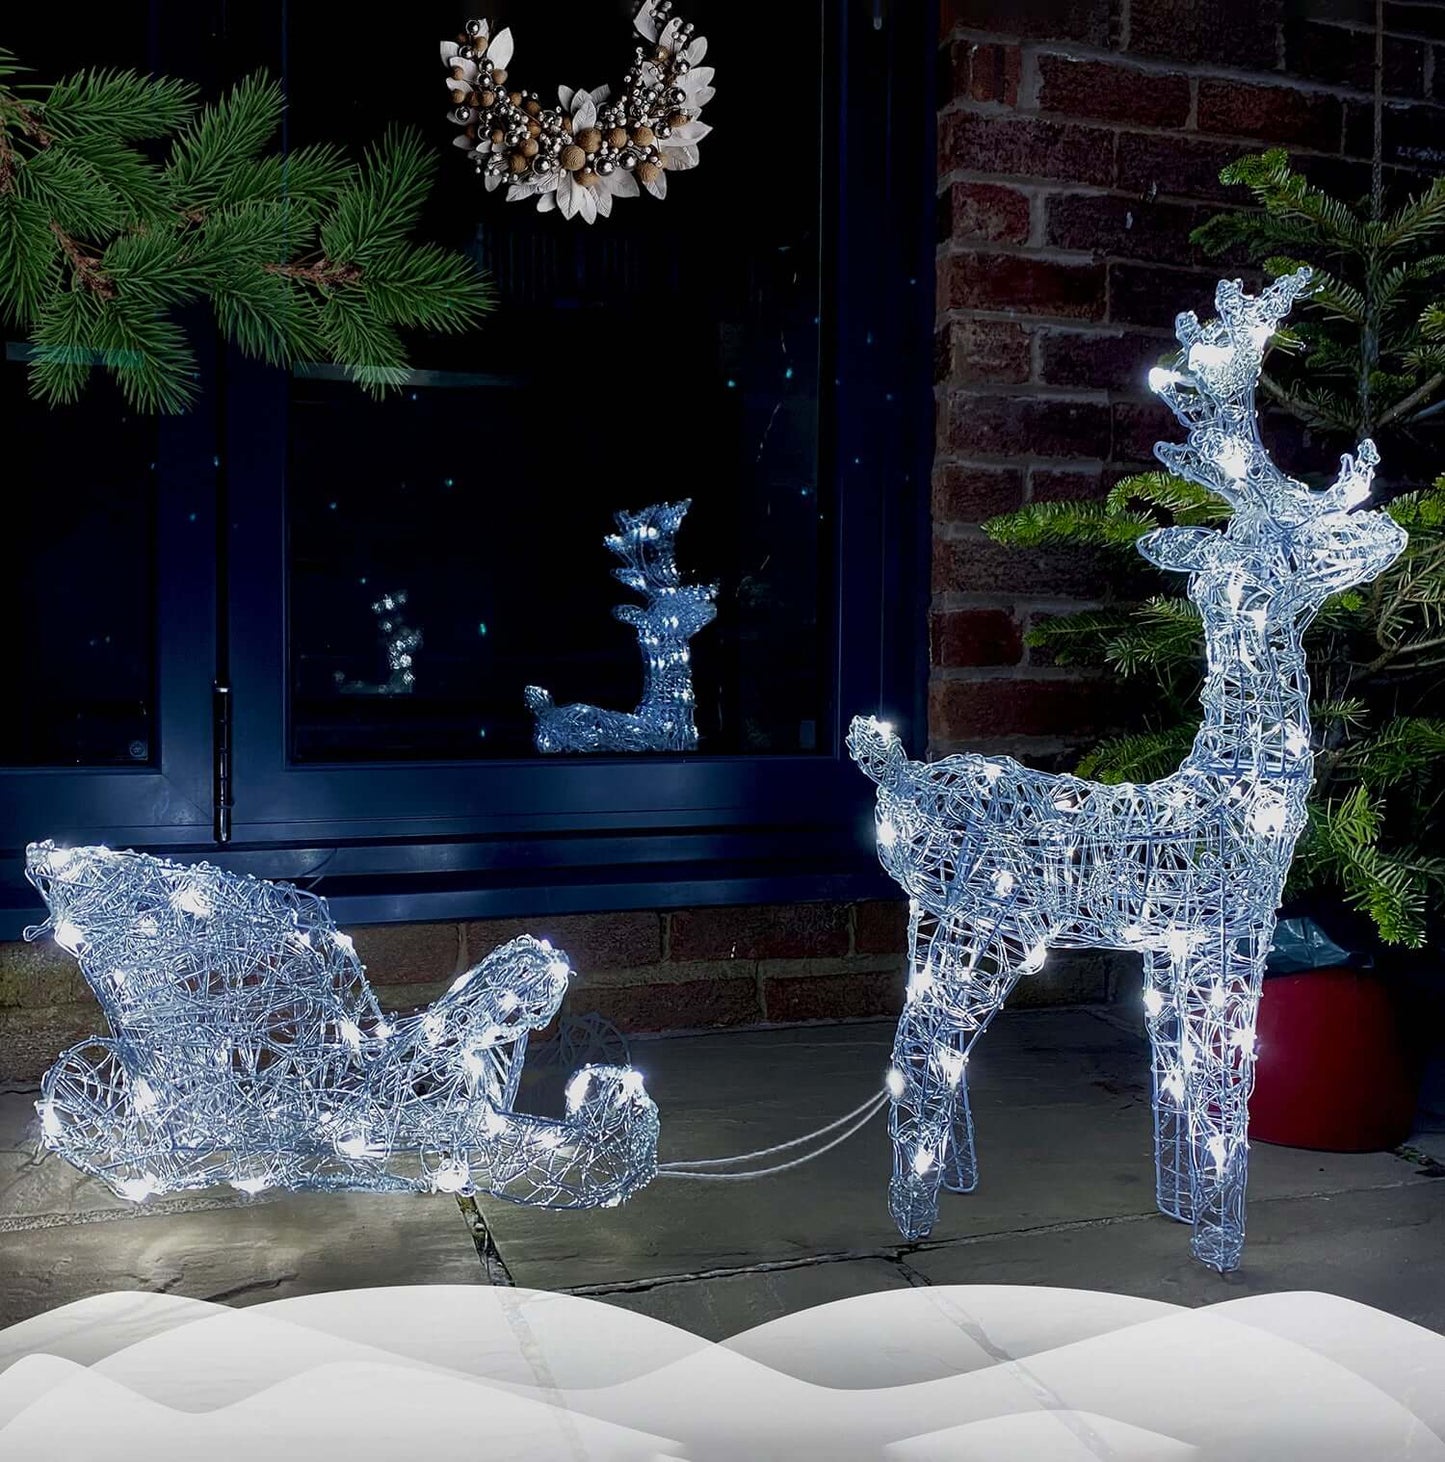 3D LED Pre-Lit Christmas Reindeer - 70cm with Sleigh or 90cm, 120cm in Warm or Cool White Lights